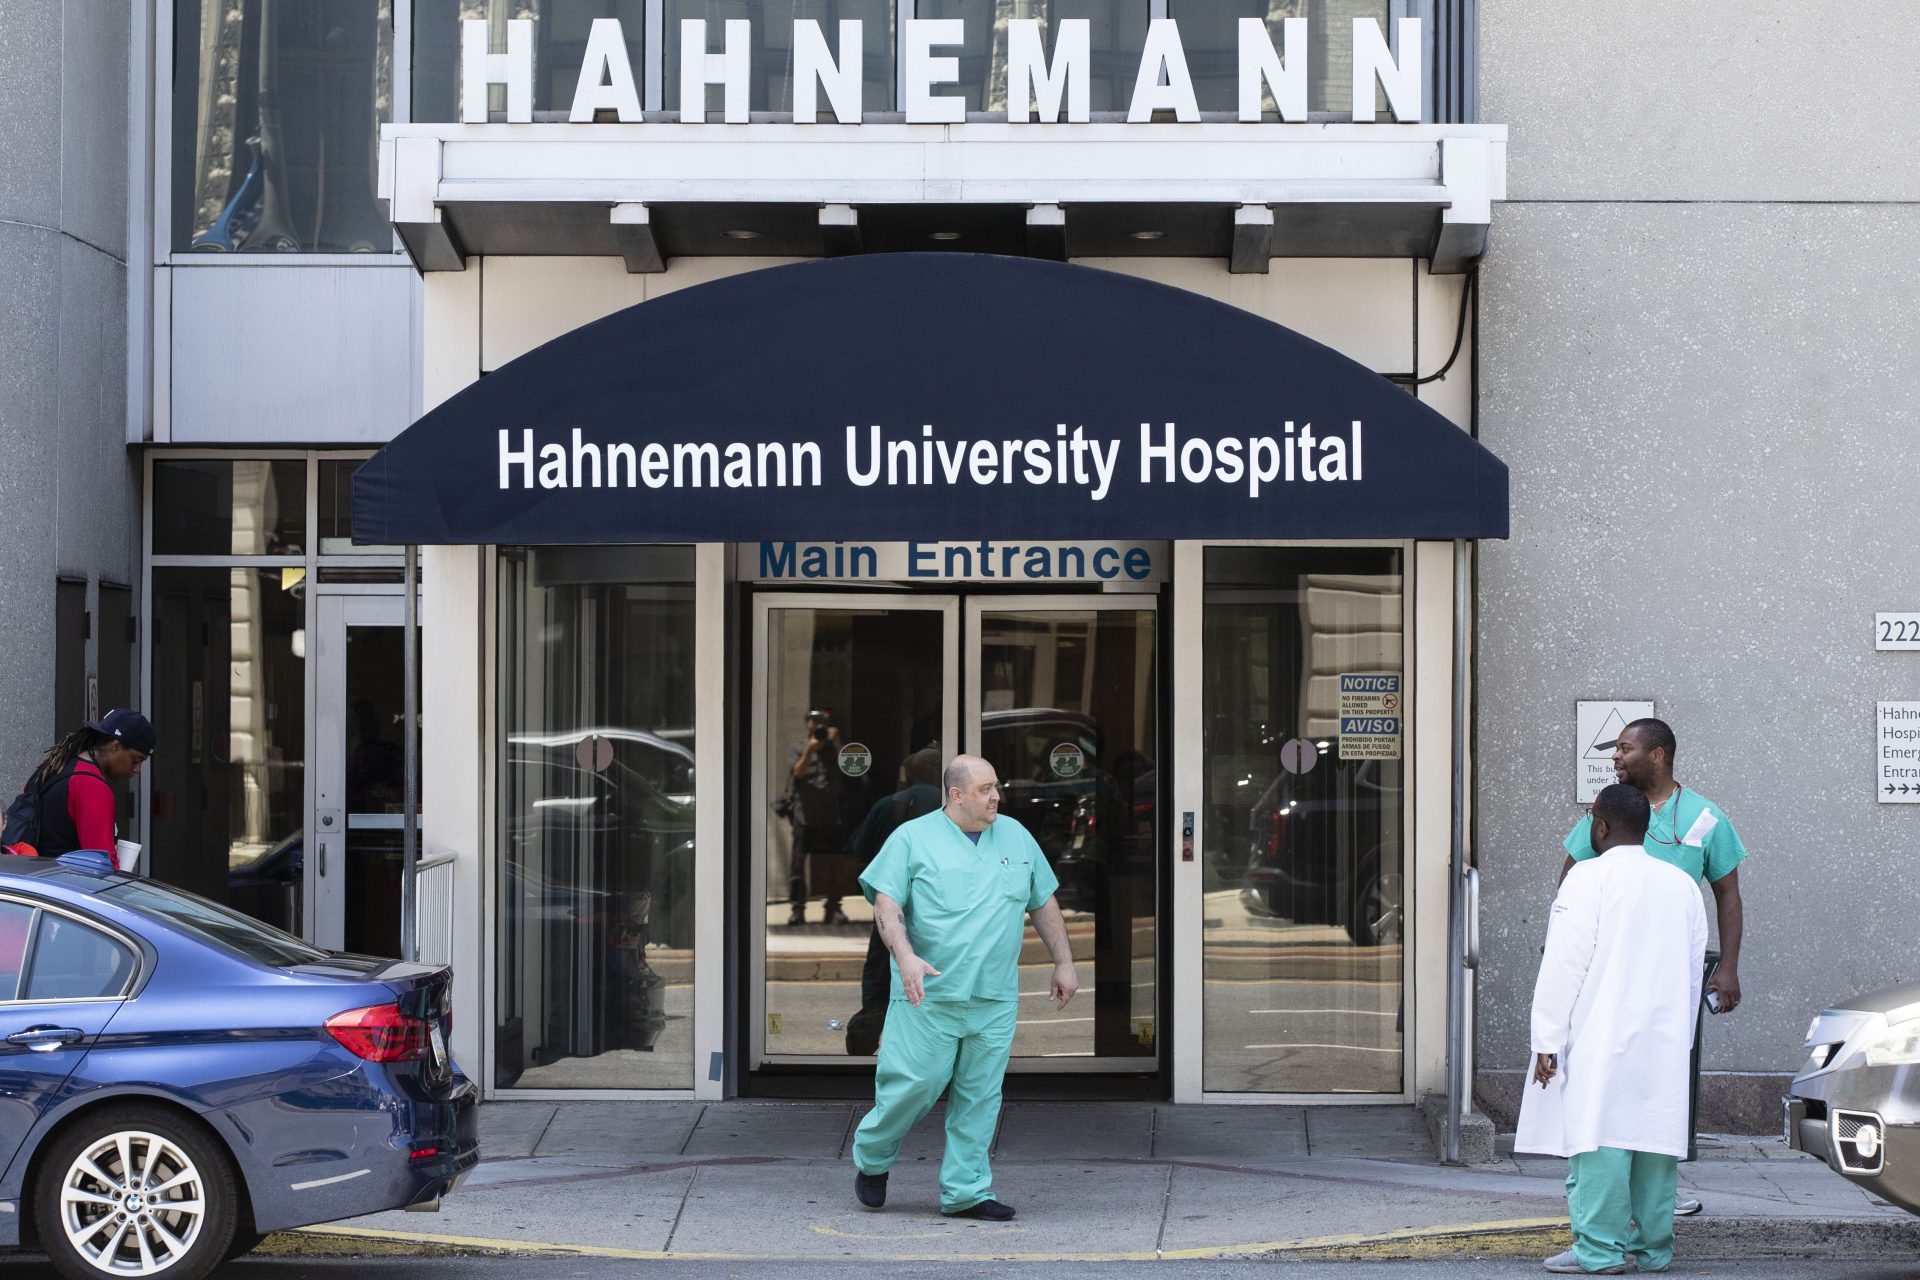 A person exits Hahnemann University Hospital in Philadelphia, Wednesday, June 26, 2019. The owner of hospital has announced it will close in September because of what the company calls "continuing, unsustainable financial losses."